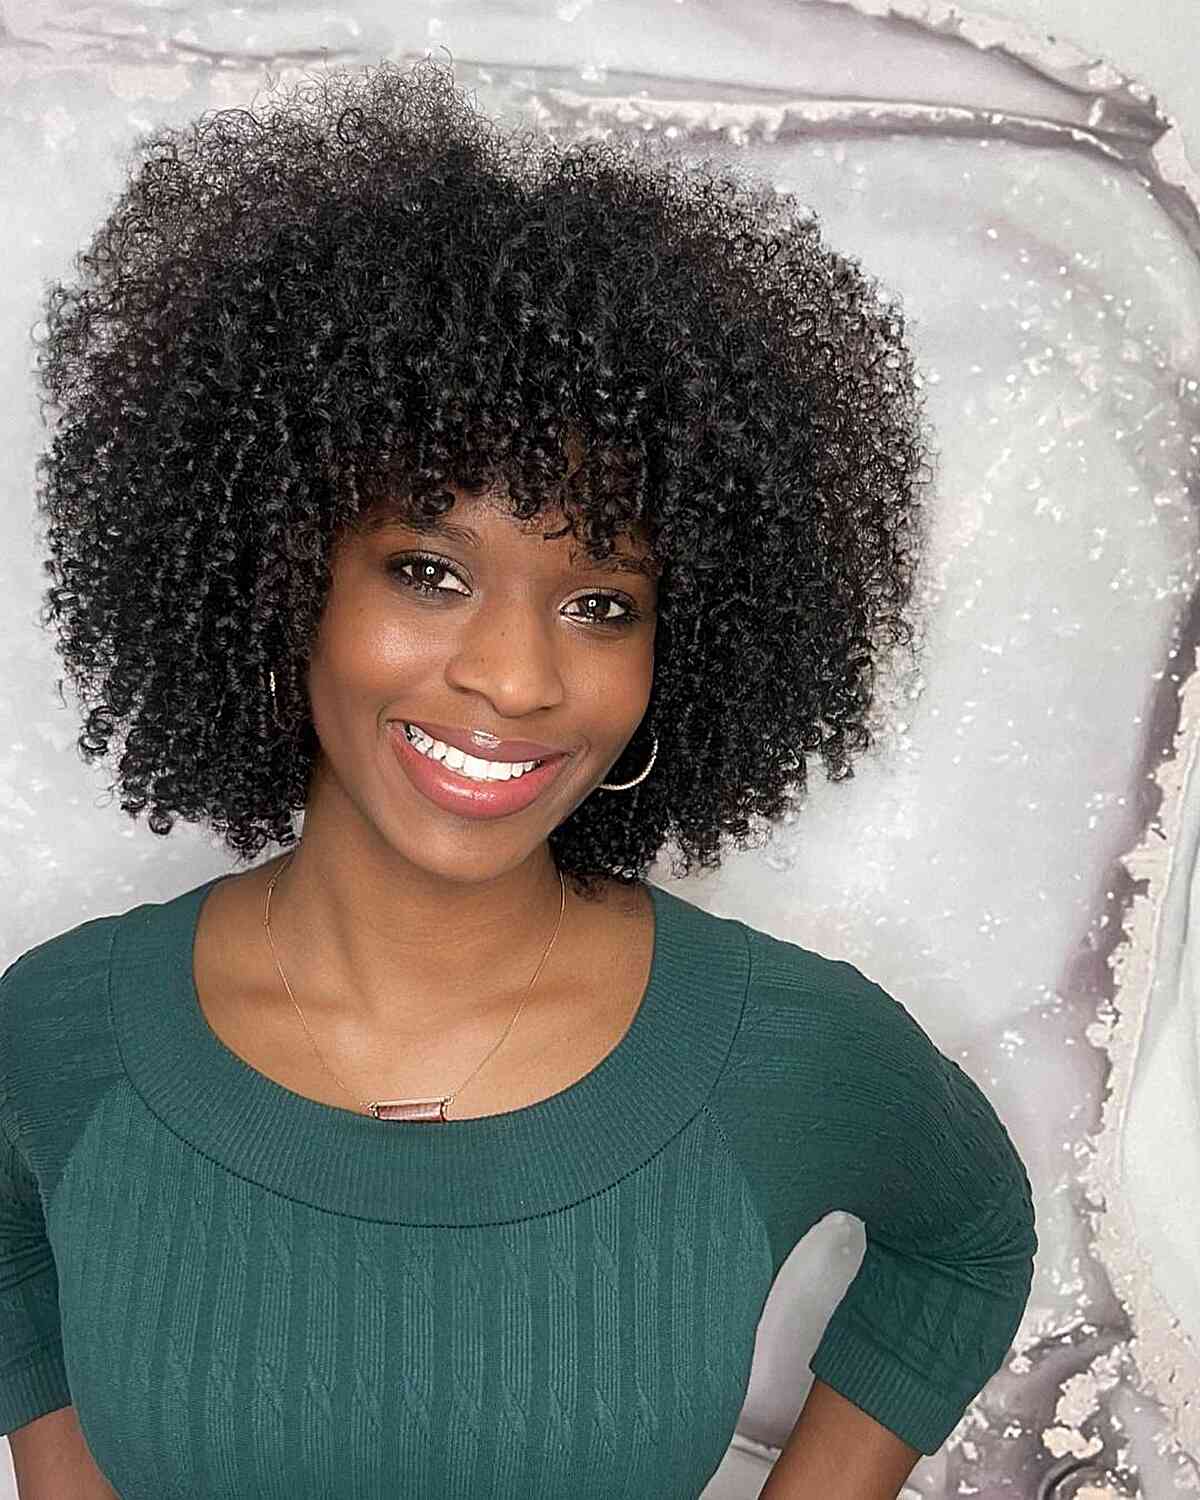 Rezo Cut for Tight Curls for Black Women with thick hair